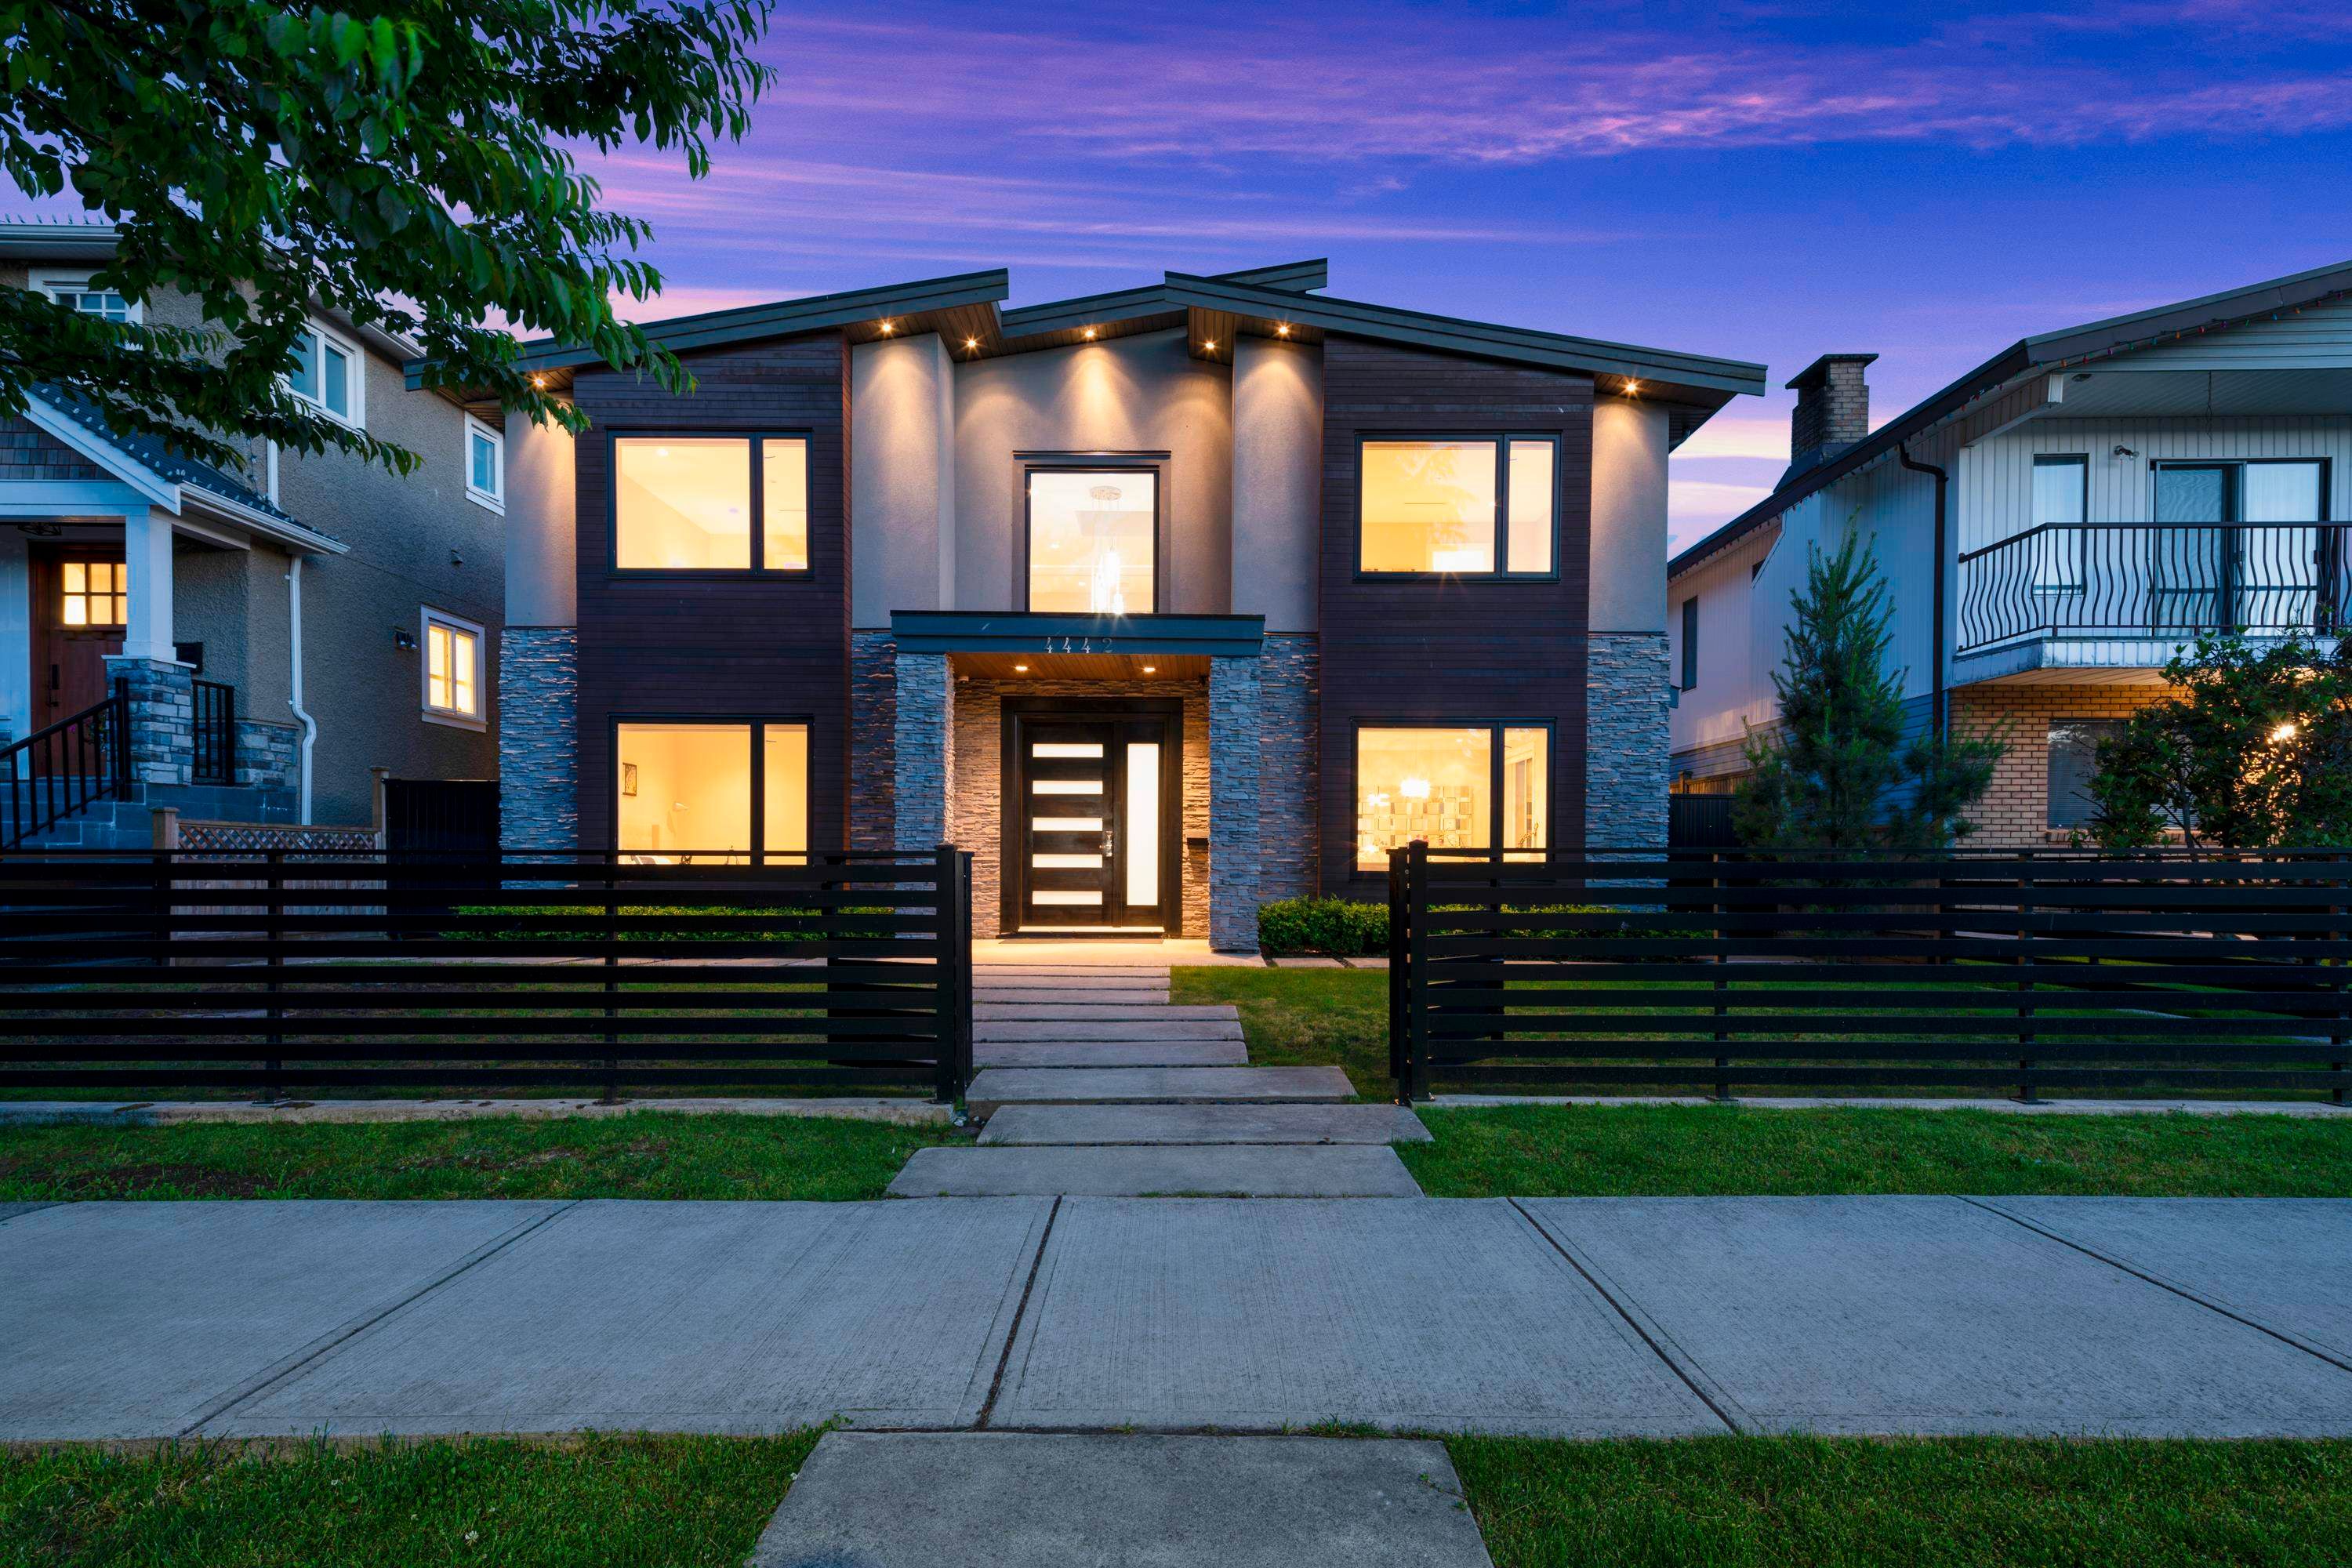 New property listed at Vancouver Heights, Burnaby North